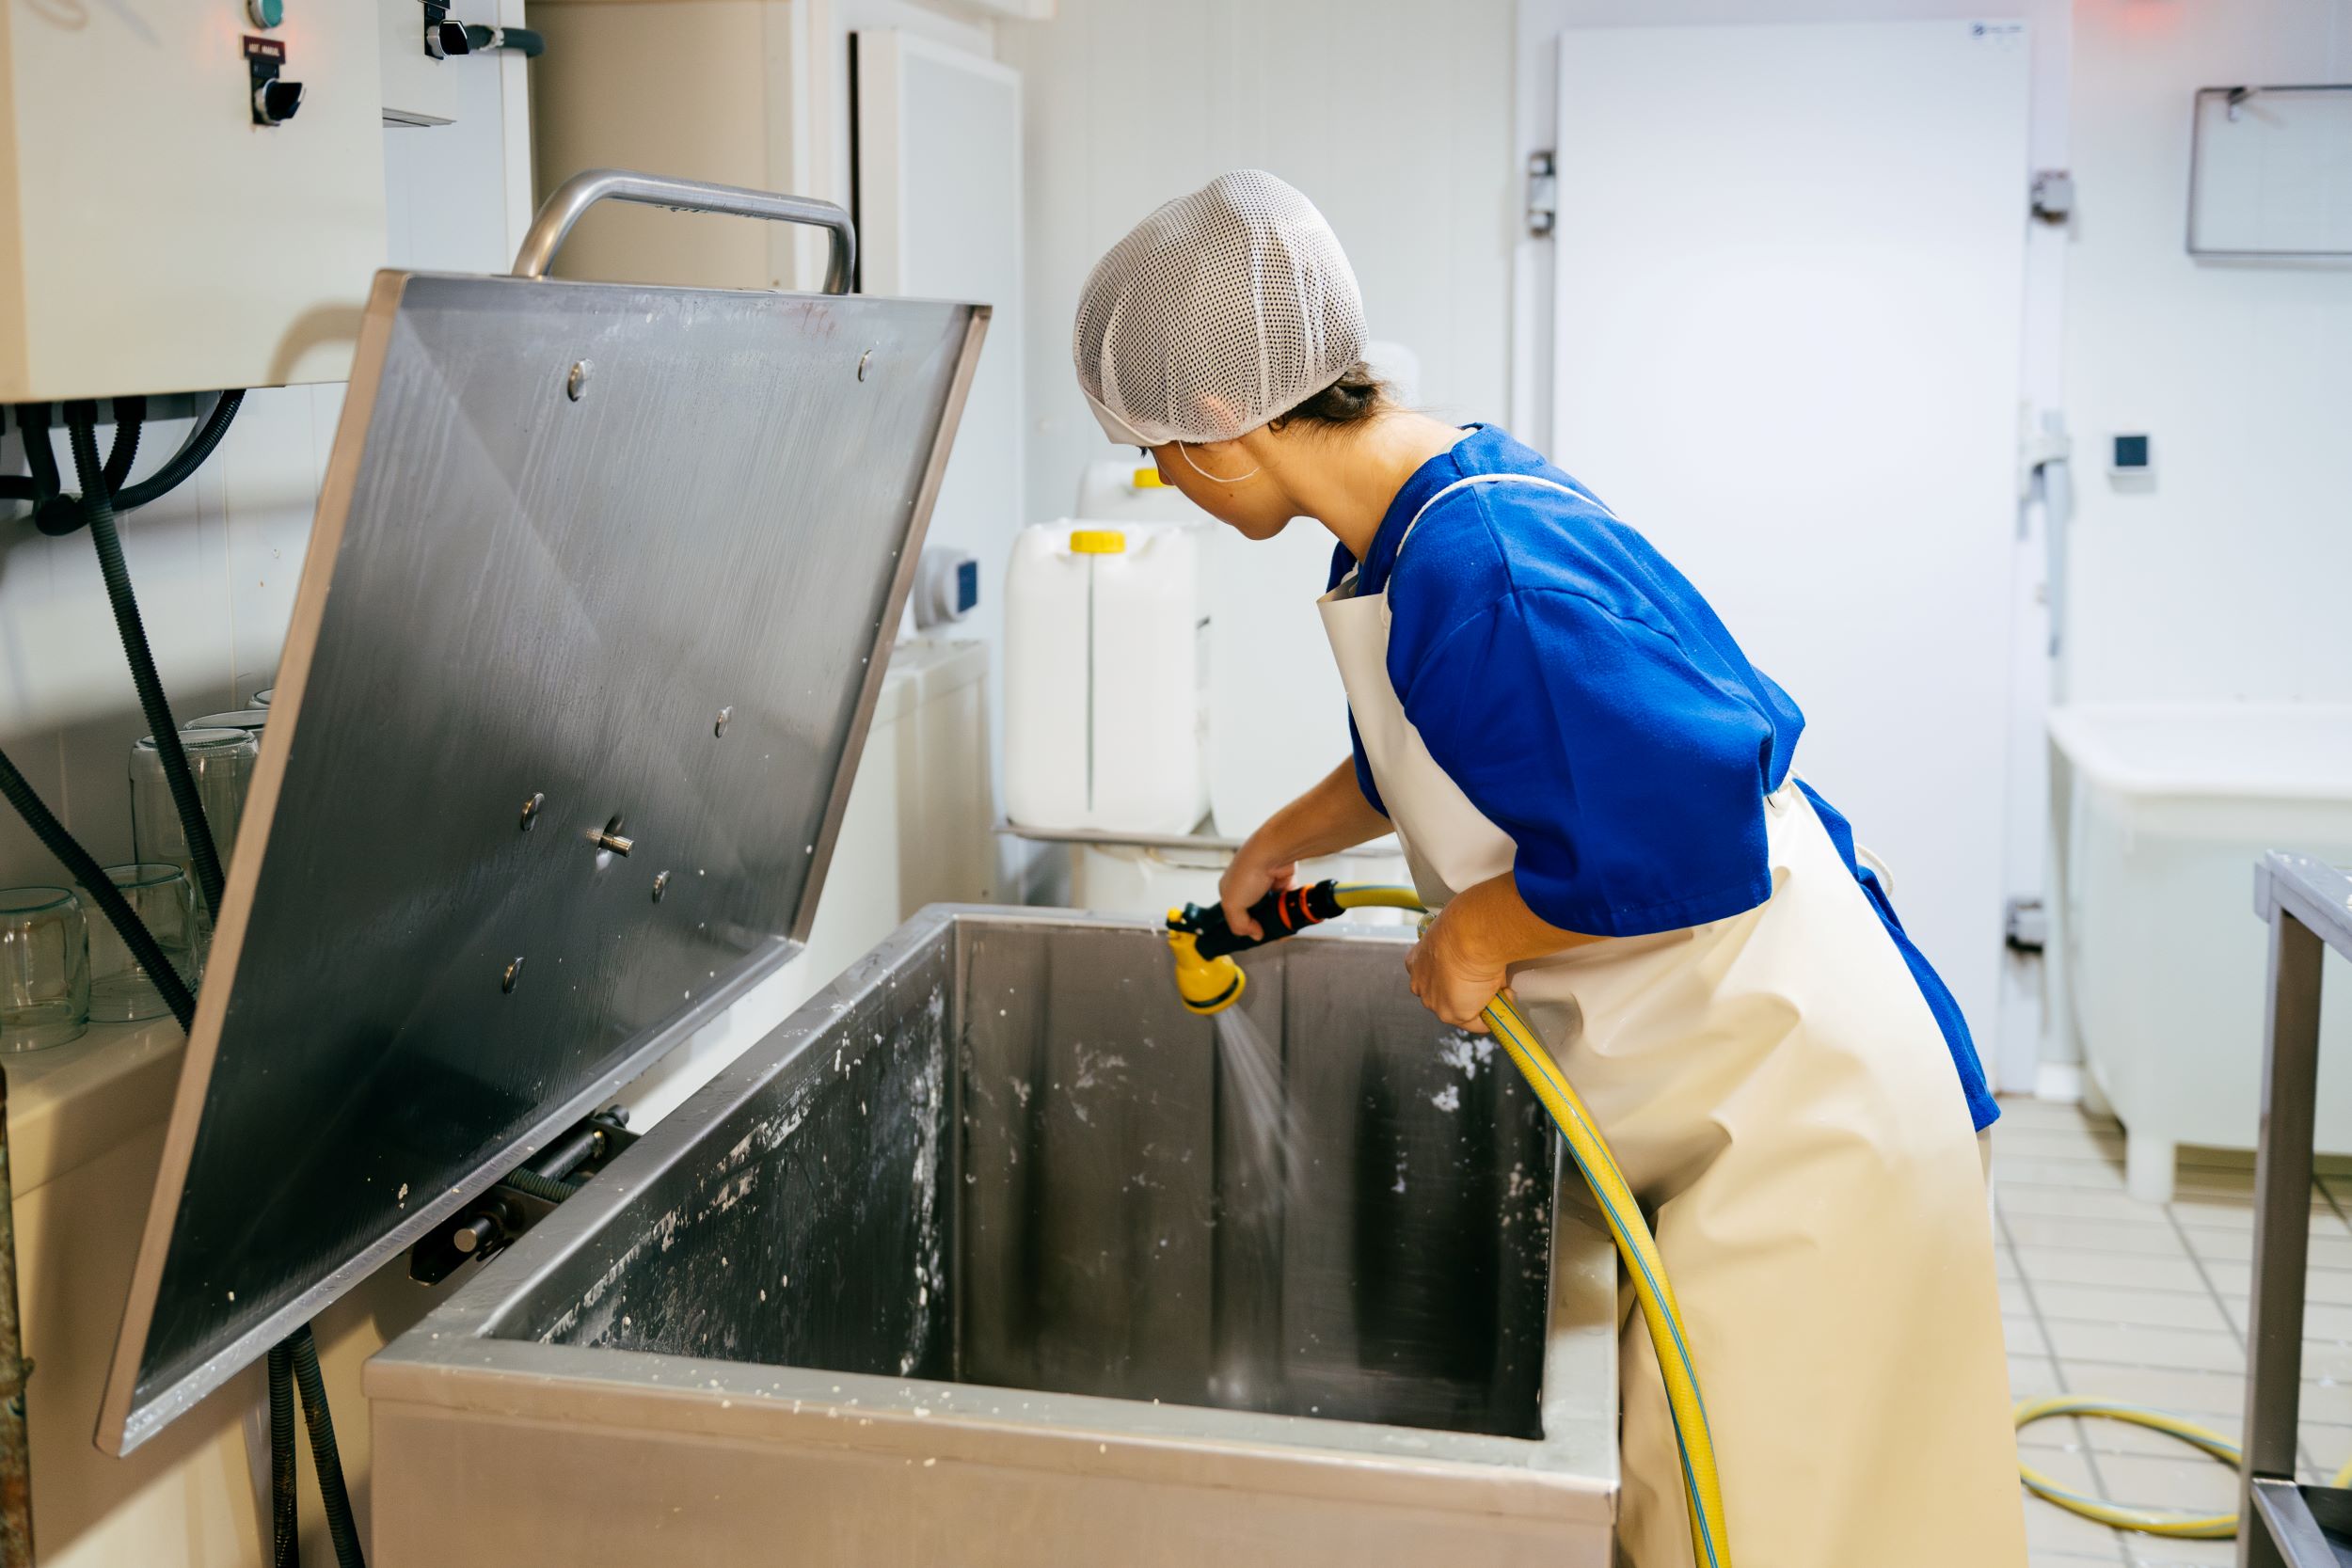 Top 6 Factory Cleaning Equipment Every Facility Needs